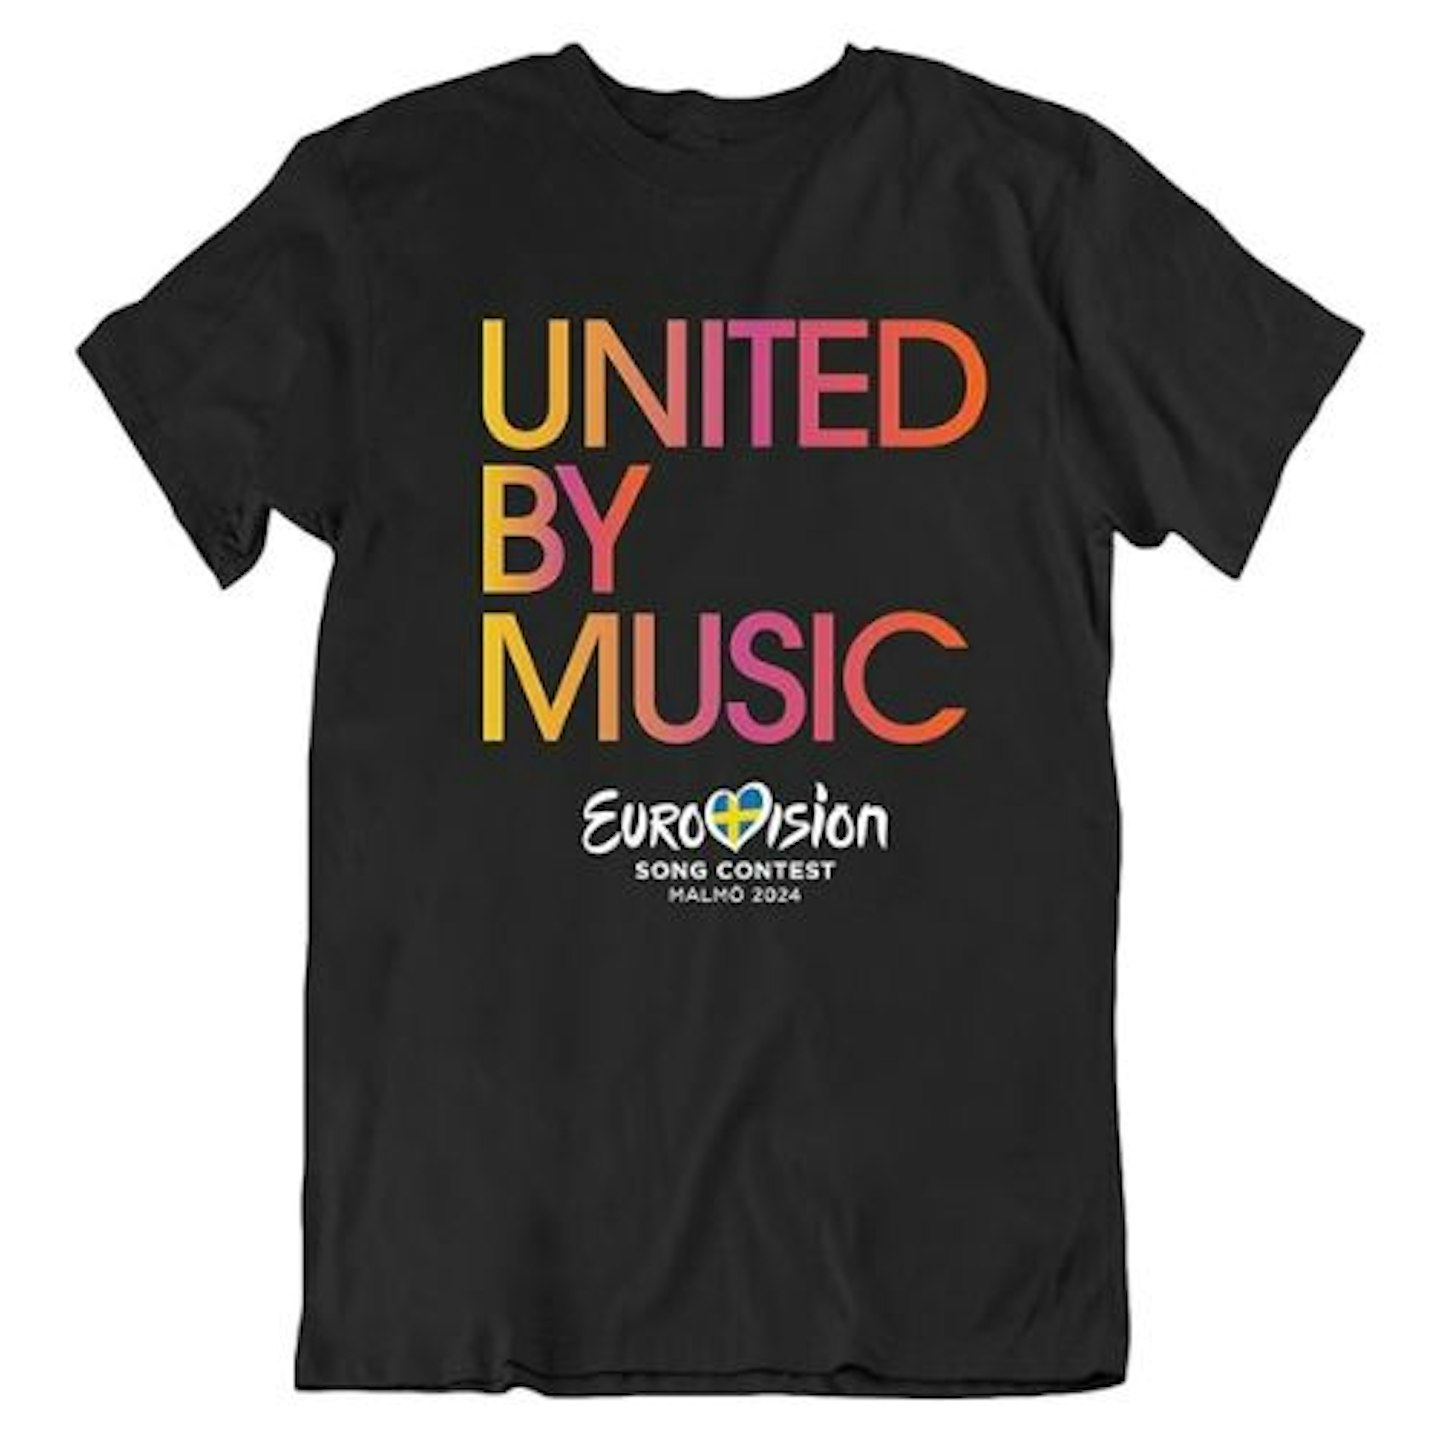 United by Music Eurovision Songcontest 2024